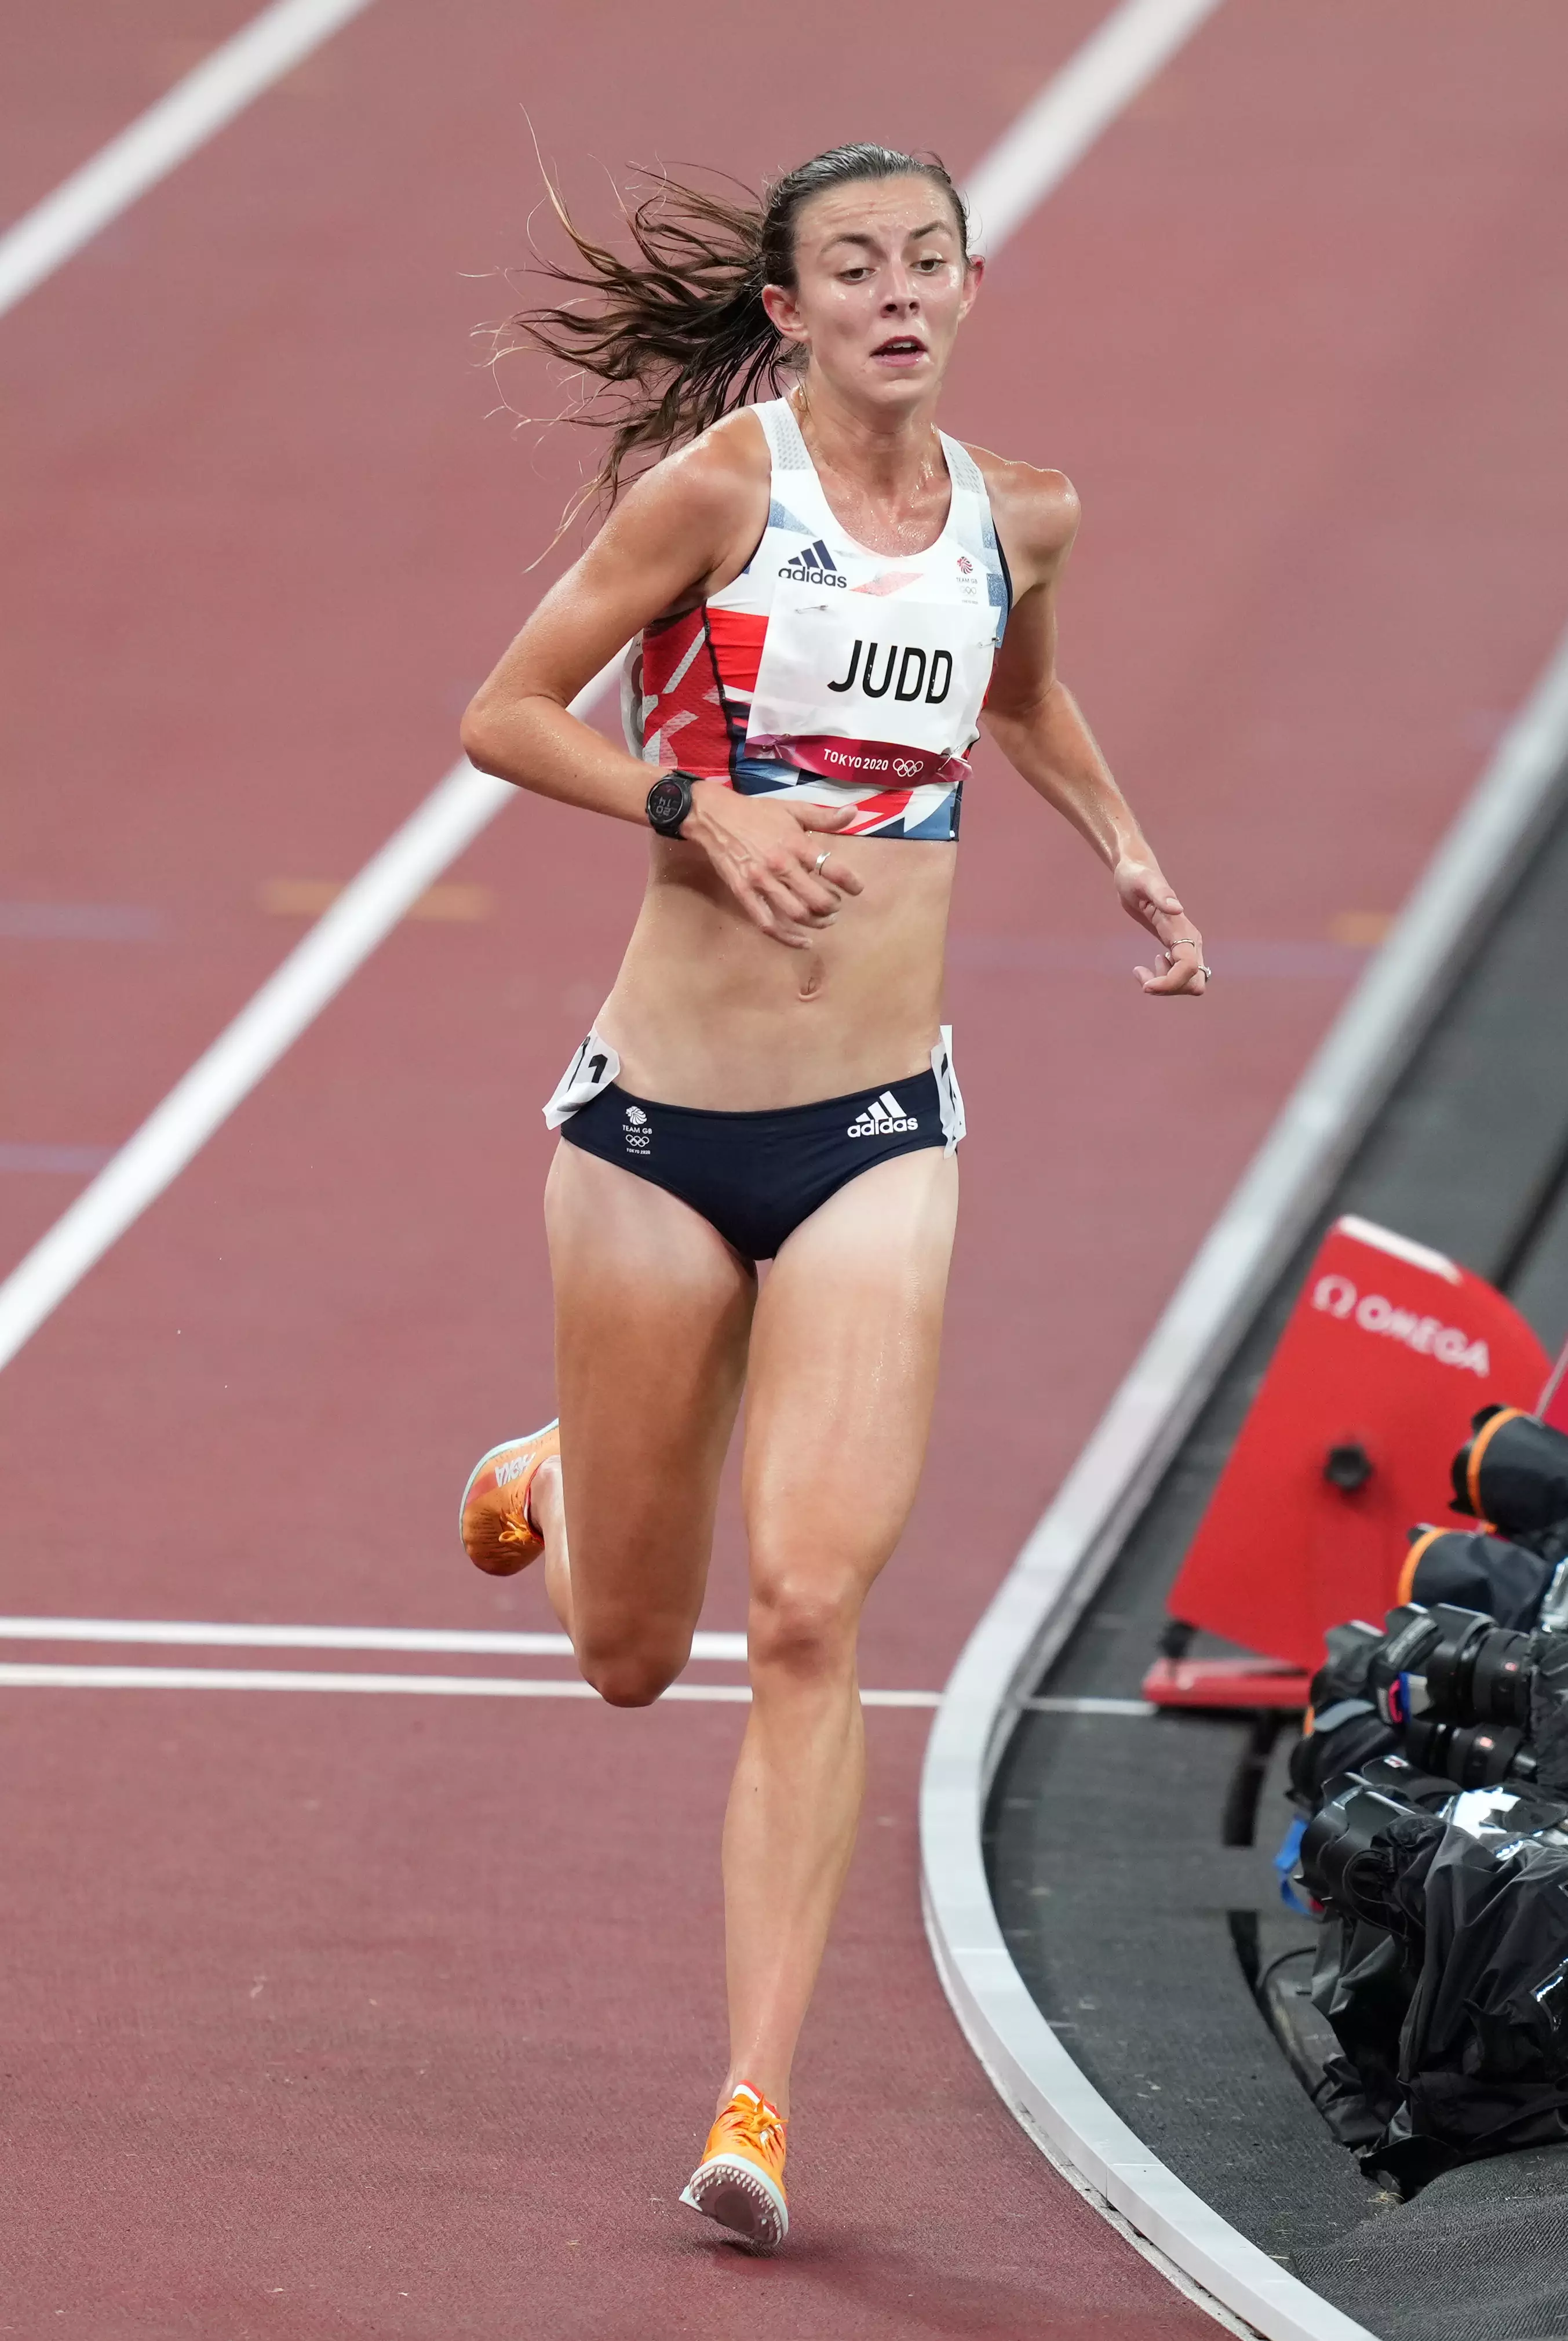 Jessica Judd collapsed after completing the 10,000m final.